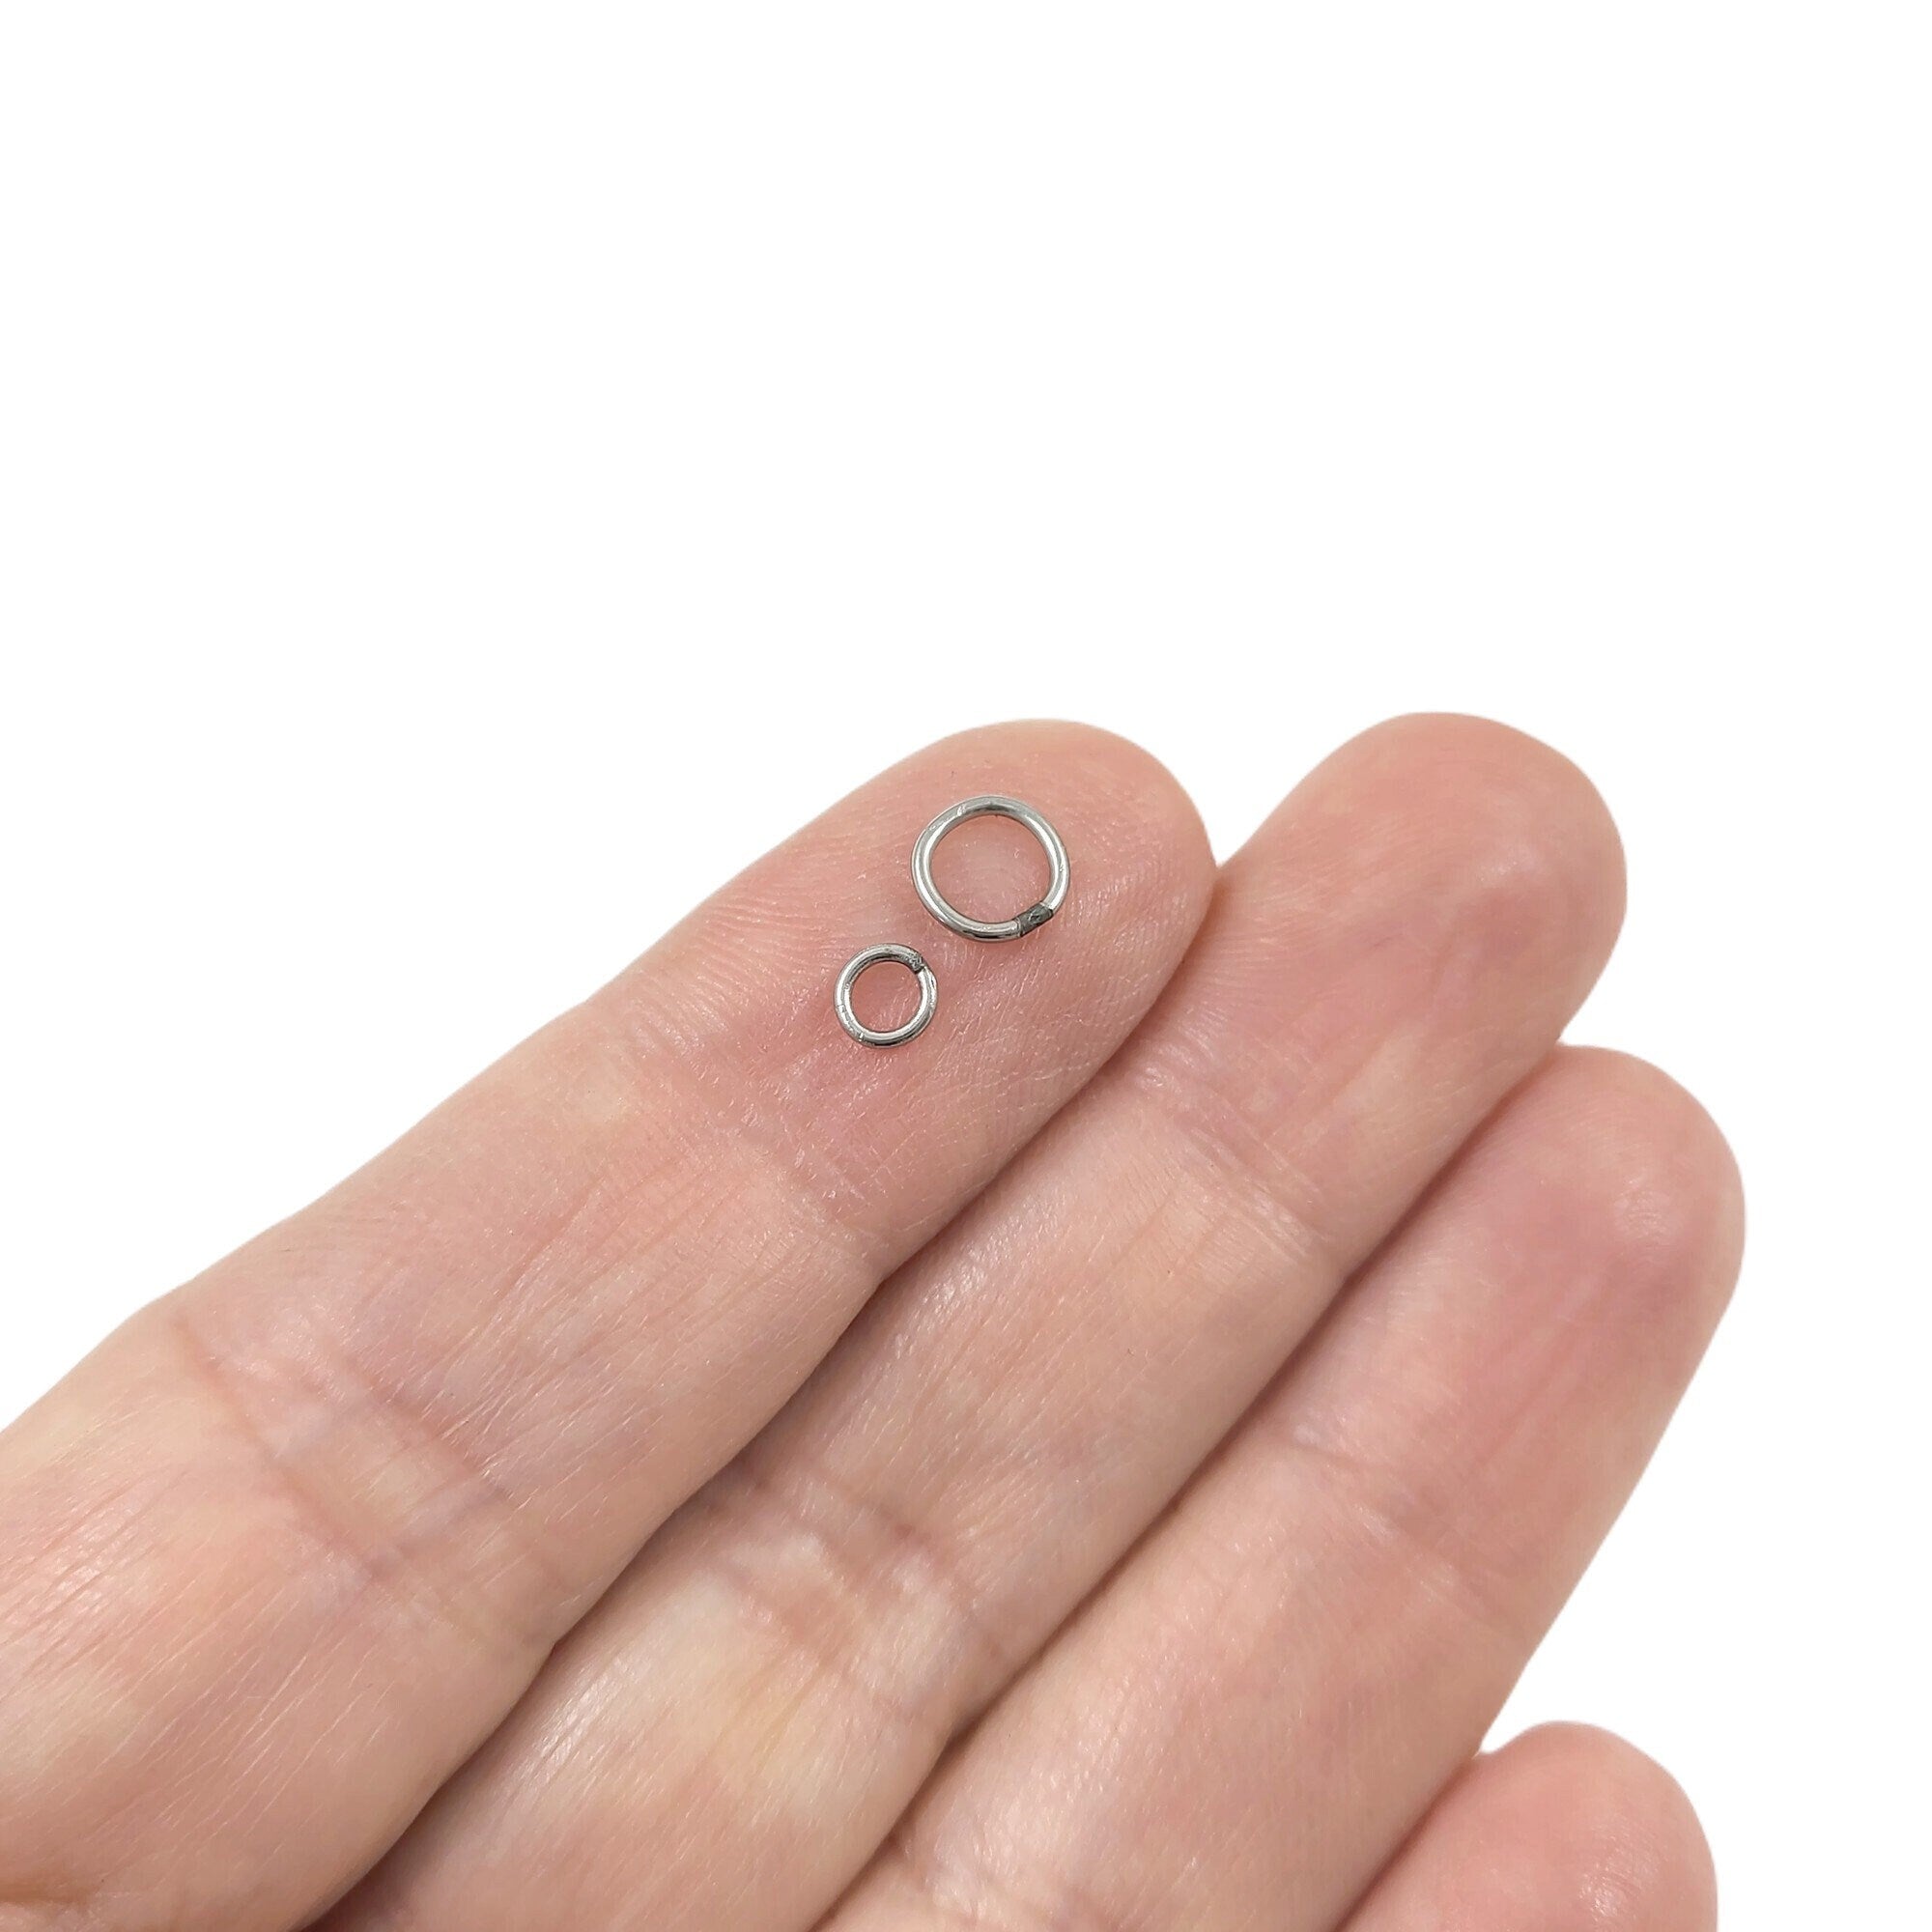 Closed soldered stainless steel jump rings, 4mm, 6mm, Hypoallergenic, tarnish free jewelry findings